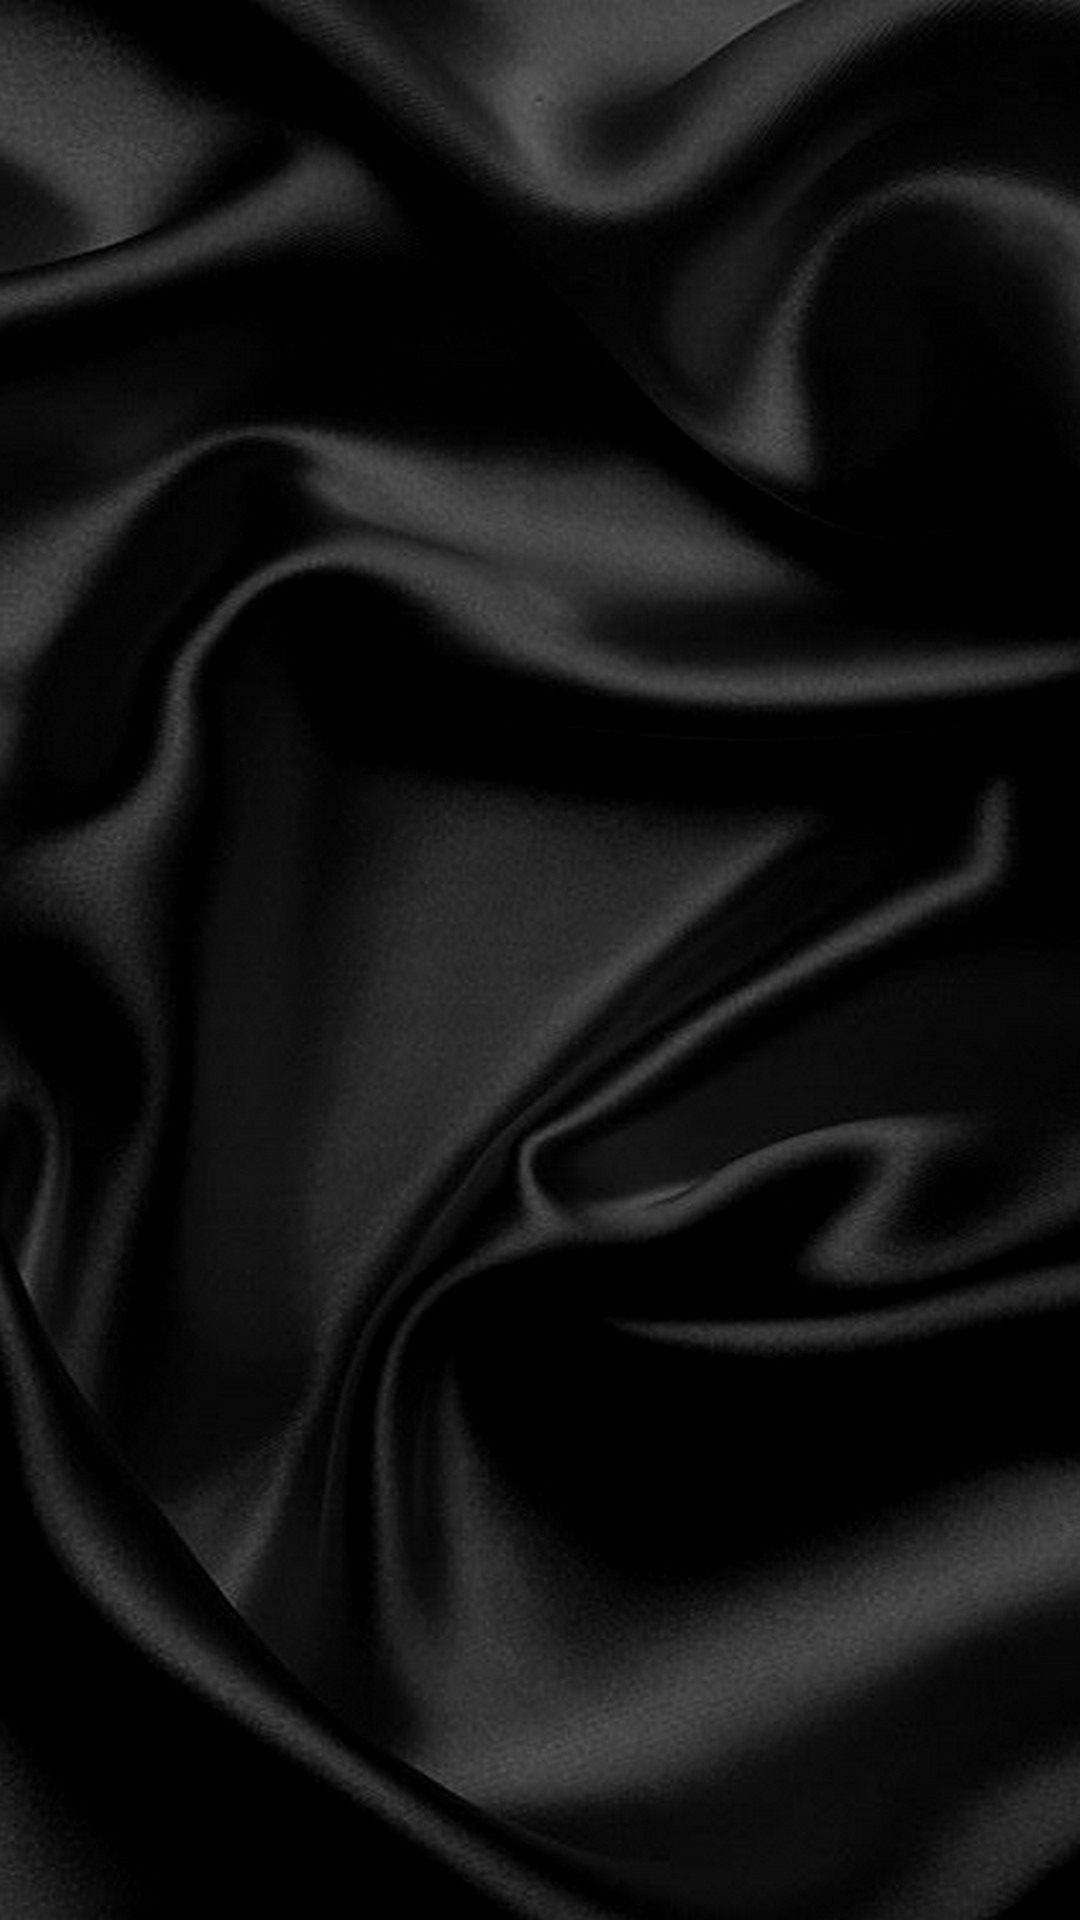 Black Silk iPhone 7 Wallpaper With high-resolution 1920X1080 pixel. You can use this wallpaper for your iPhone 5, 6, 7, 8, X, XS, XR backgrounds, Mobile Screensaver, or iPad Lock Screen